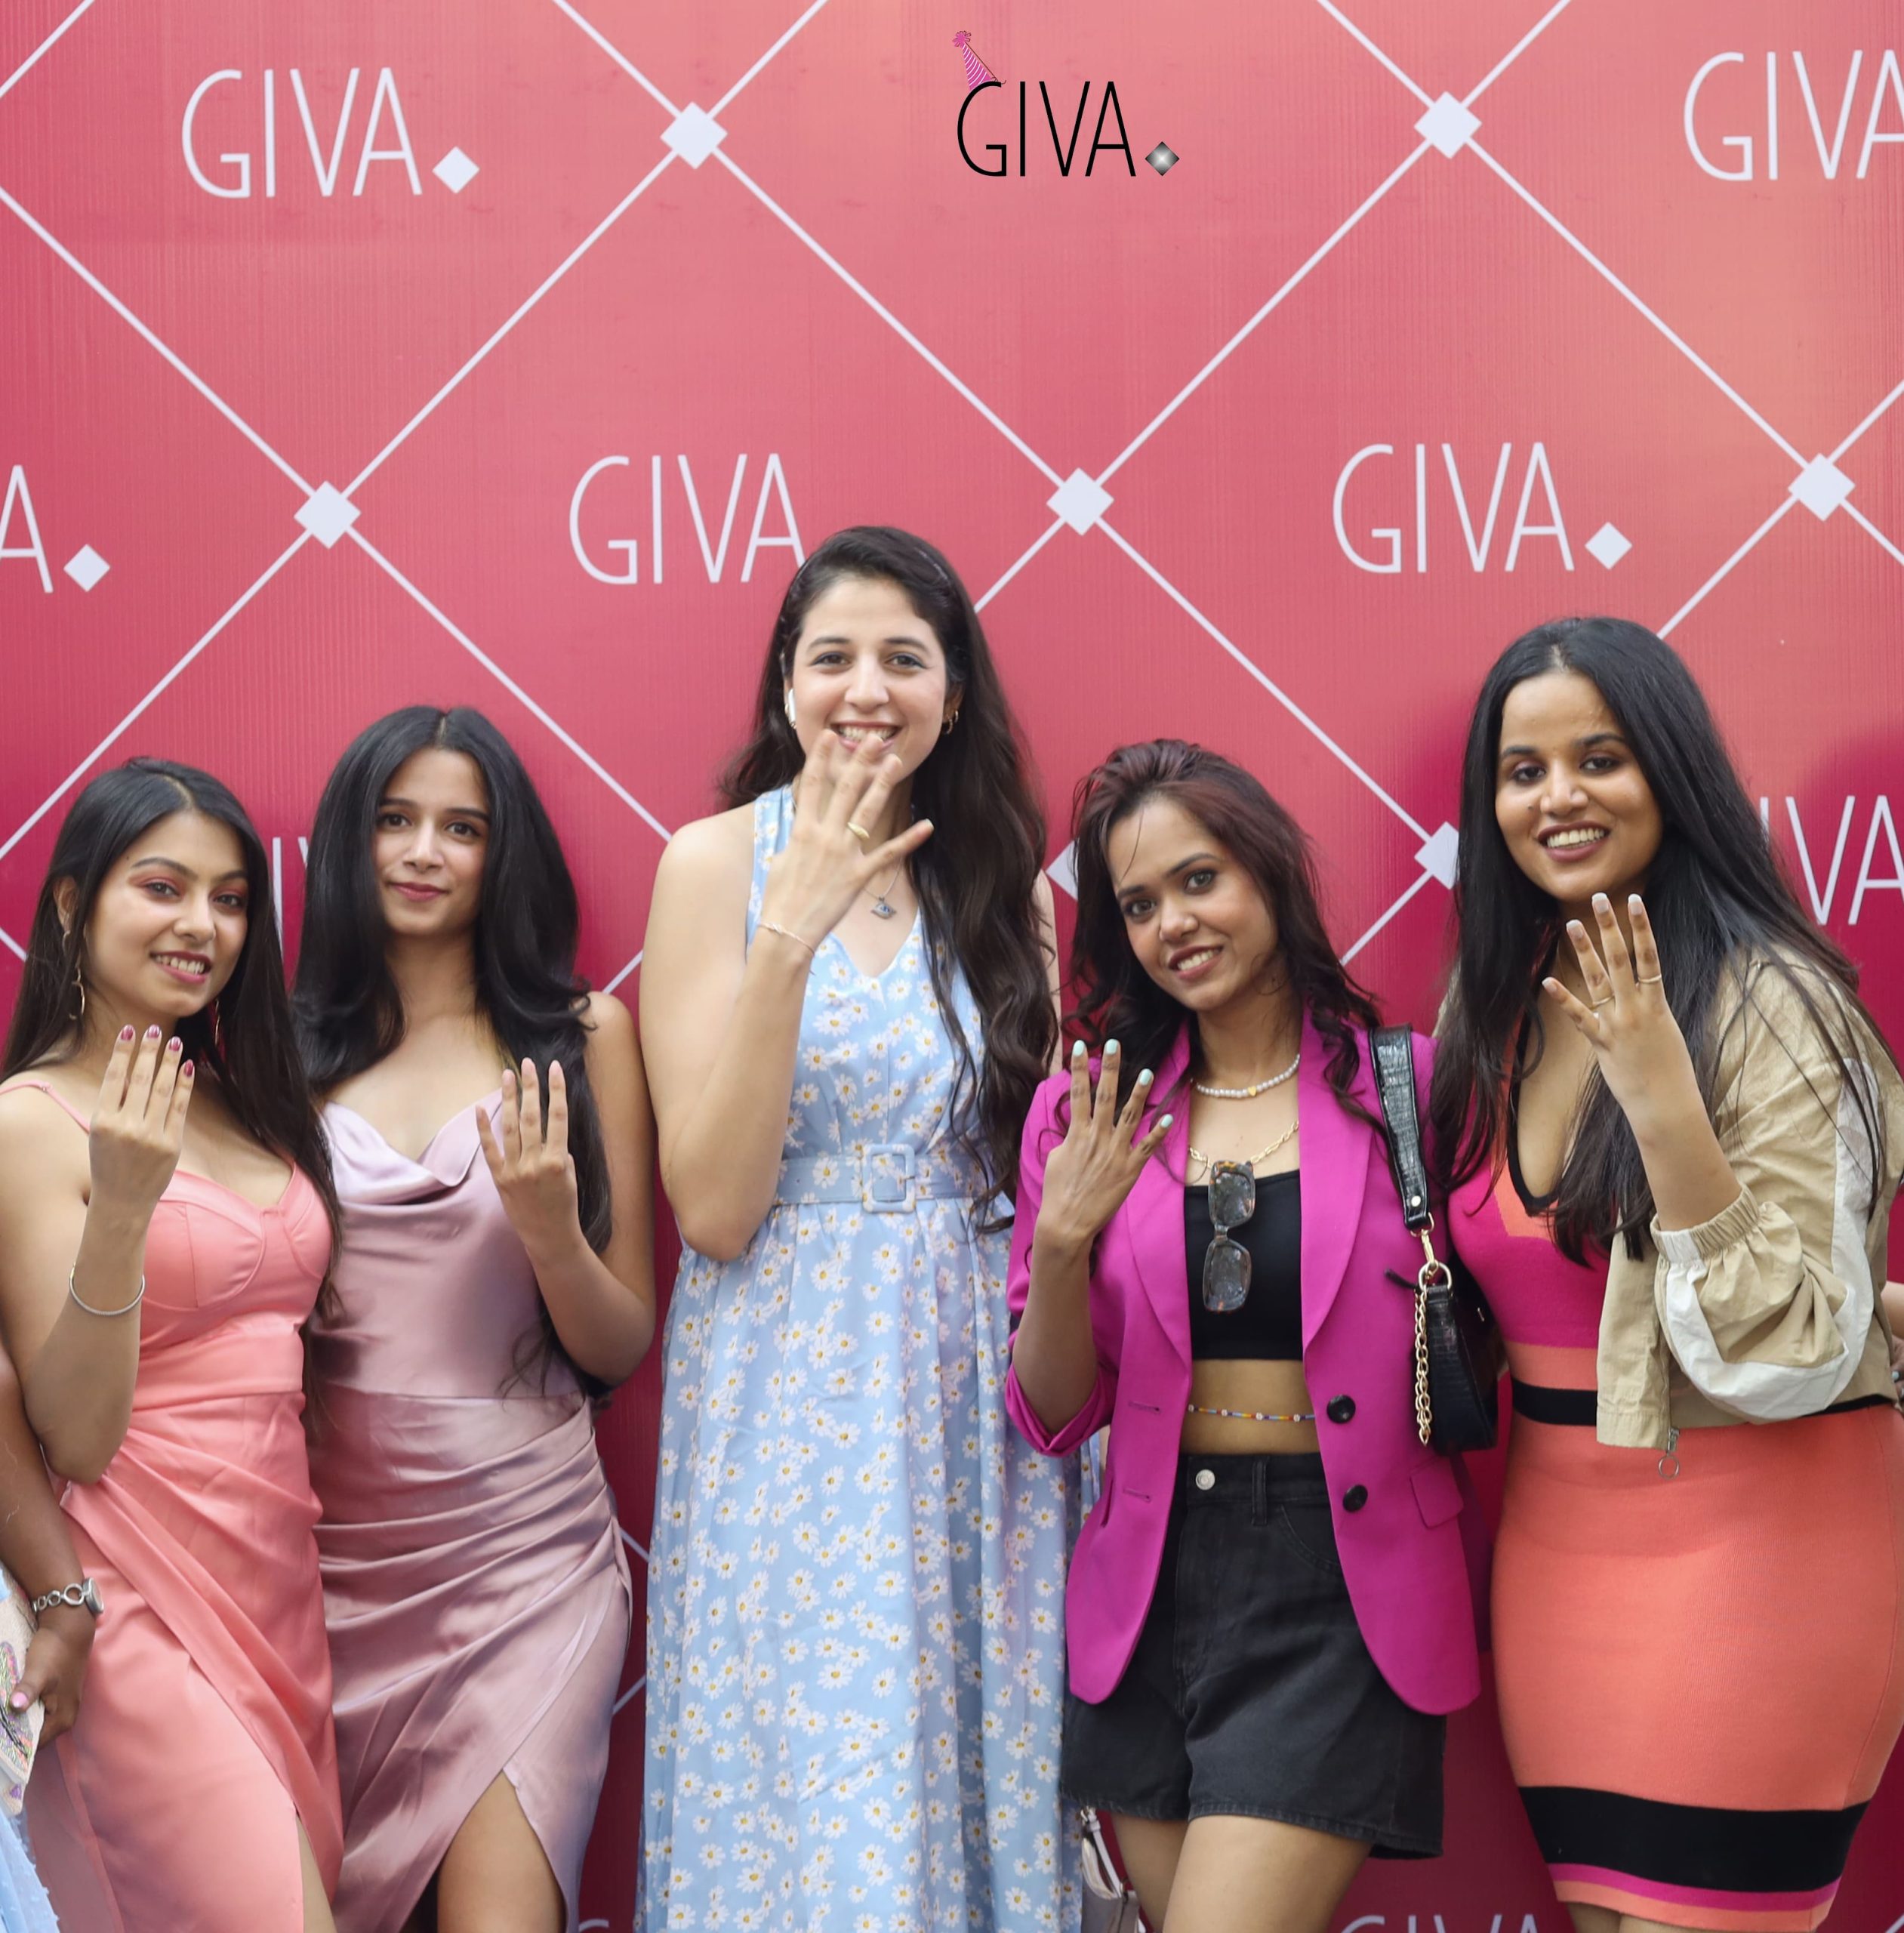 GIVA Marks Its Fourth Anniversary With A Magnificent Fashion Extravaganza And Side-Splitting Comedy Gala In The City